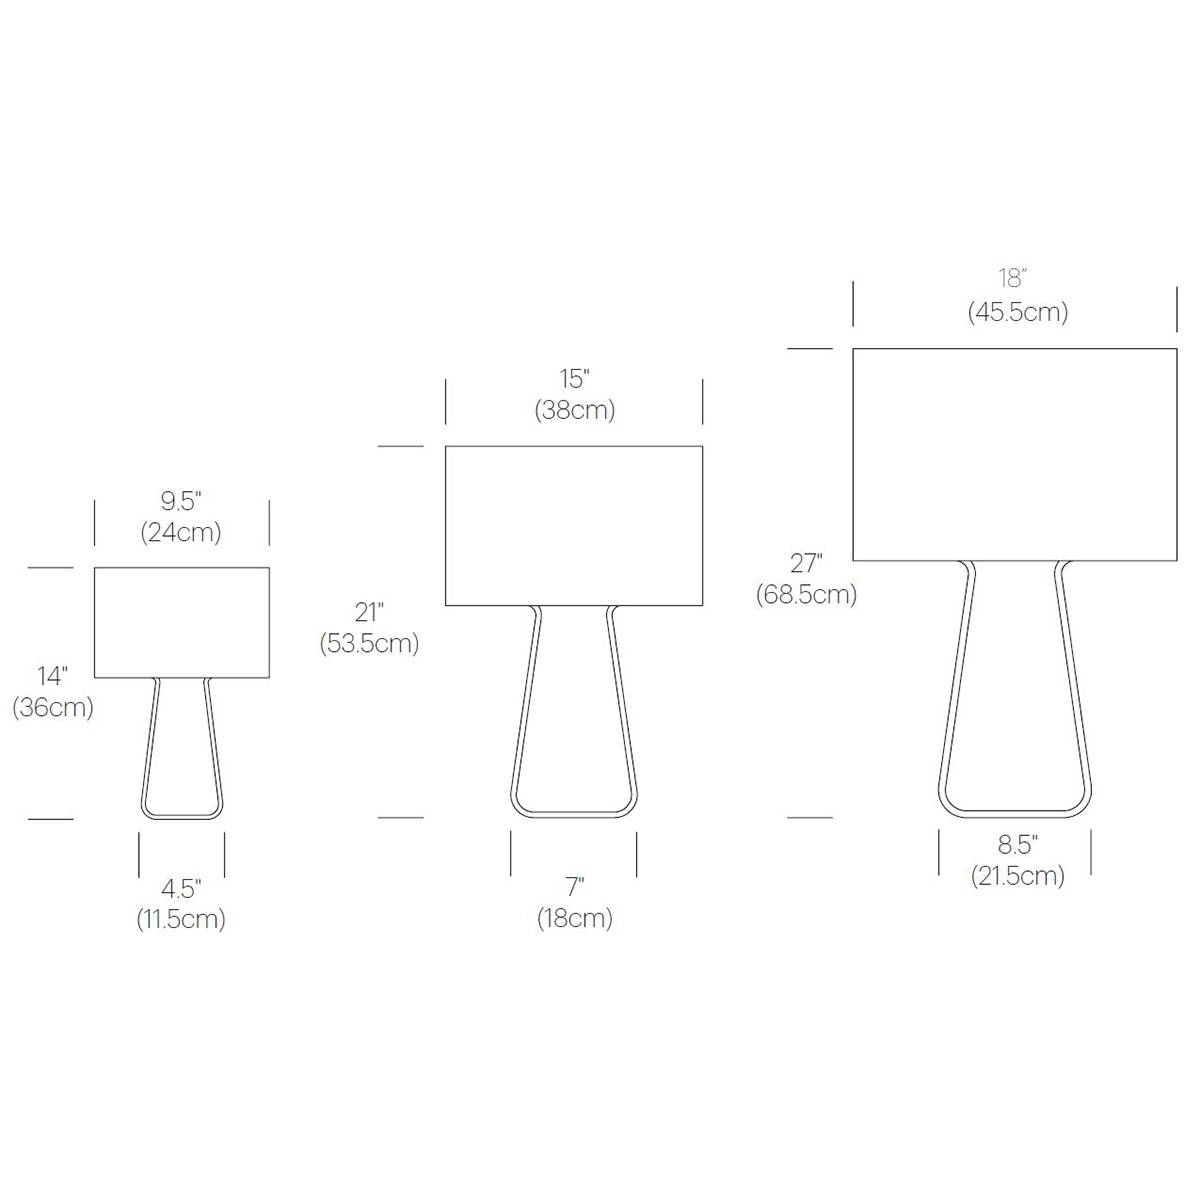 Tube Top Table Lamp Specifications